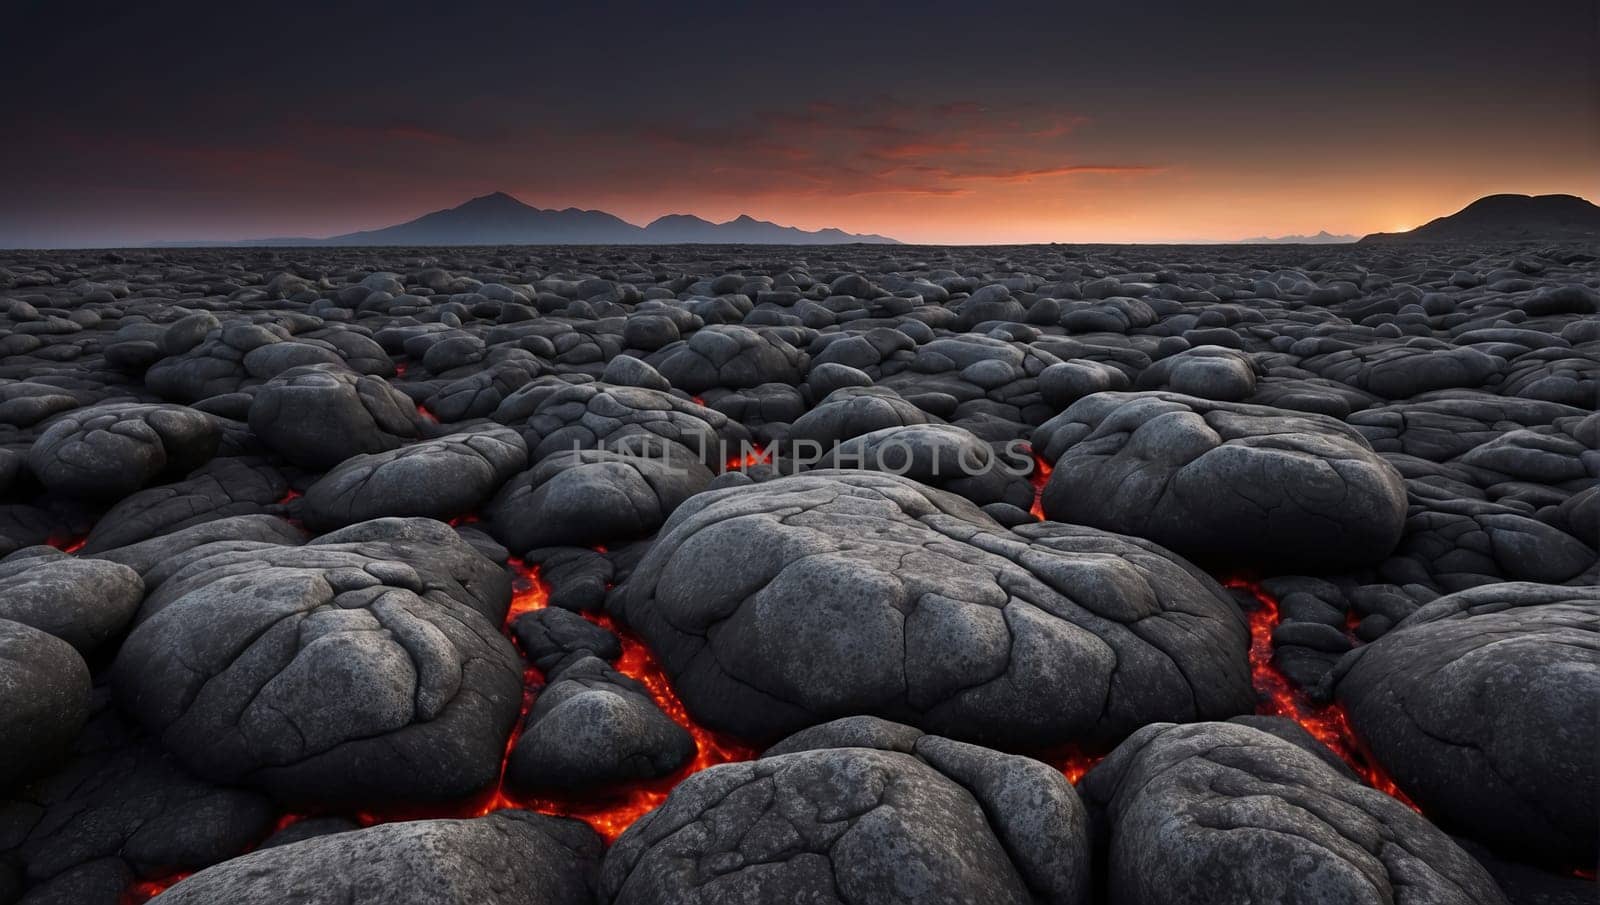 Cooling lava field by applesstock